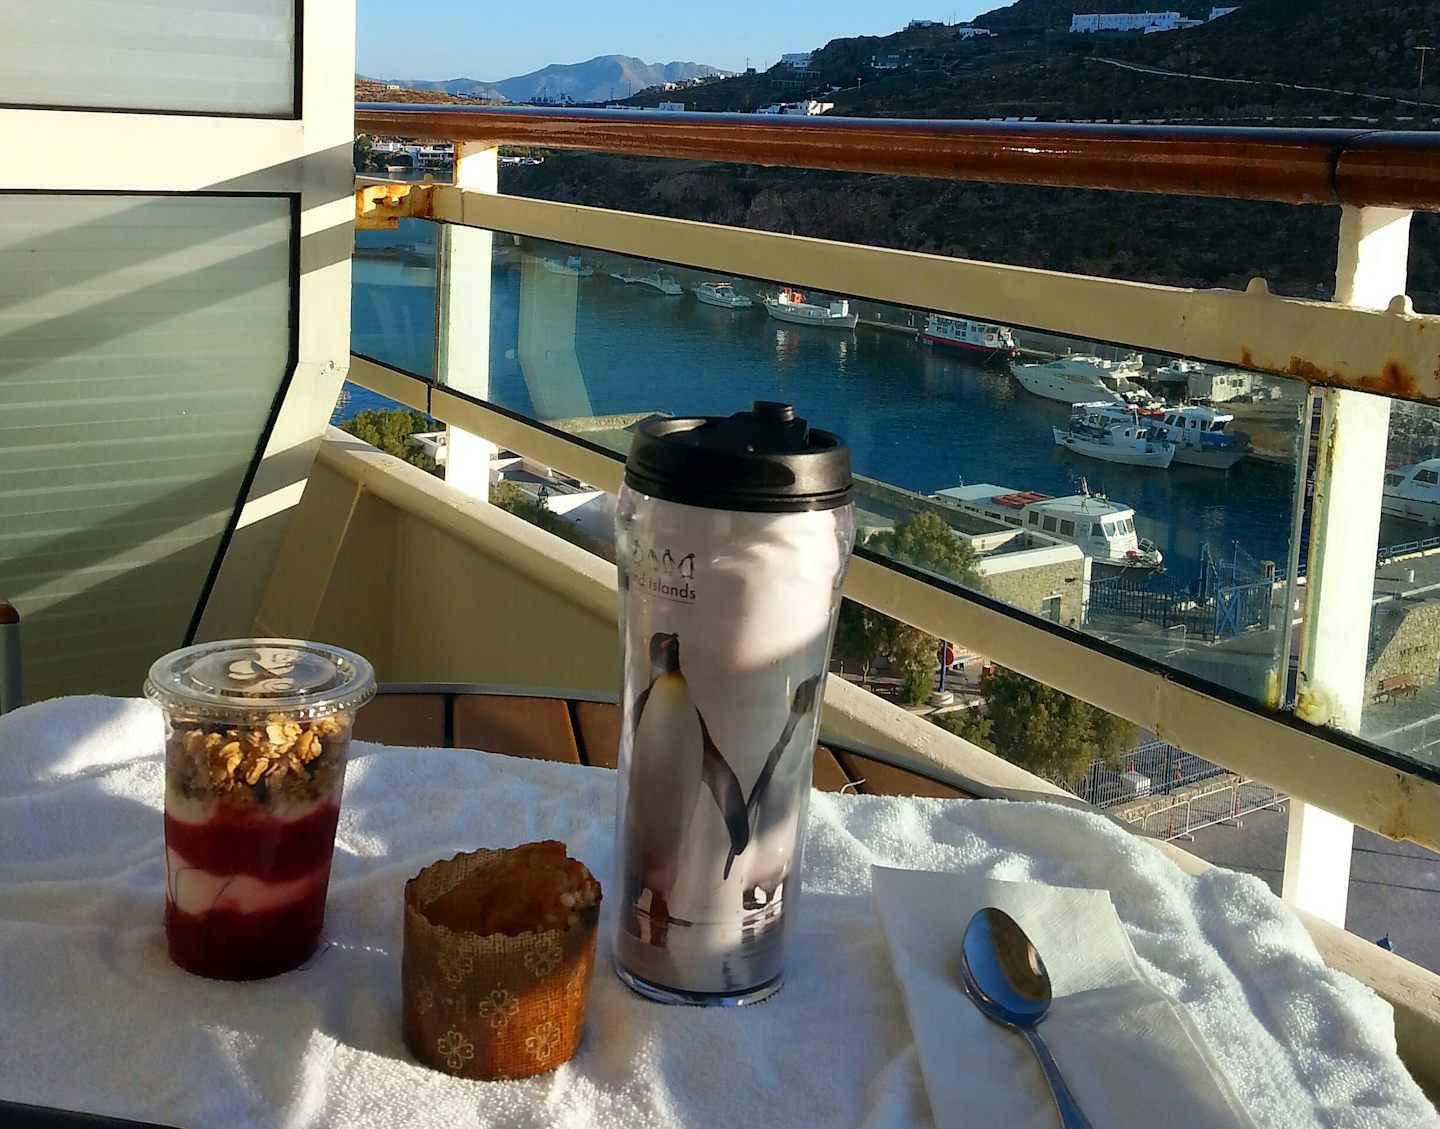 Breakfast on our balcony overlooking Chania Crete. Great breakfast choices